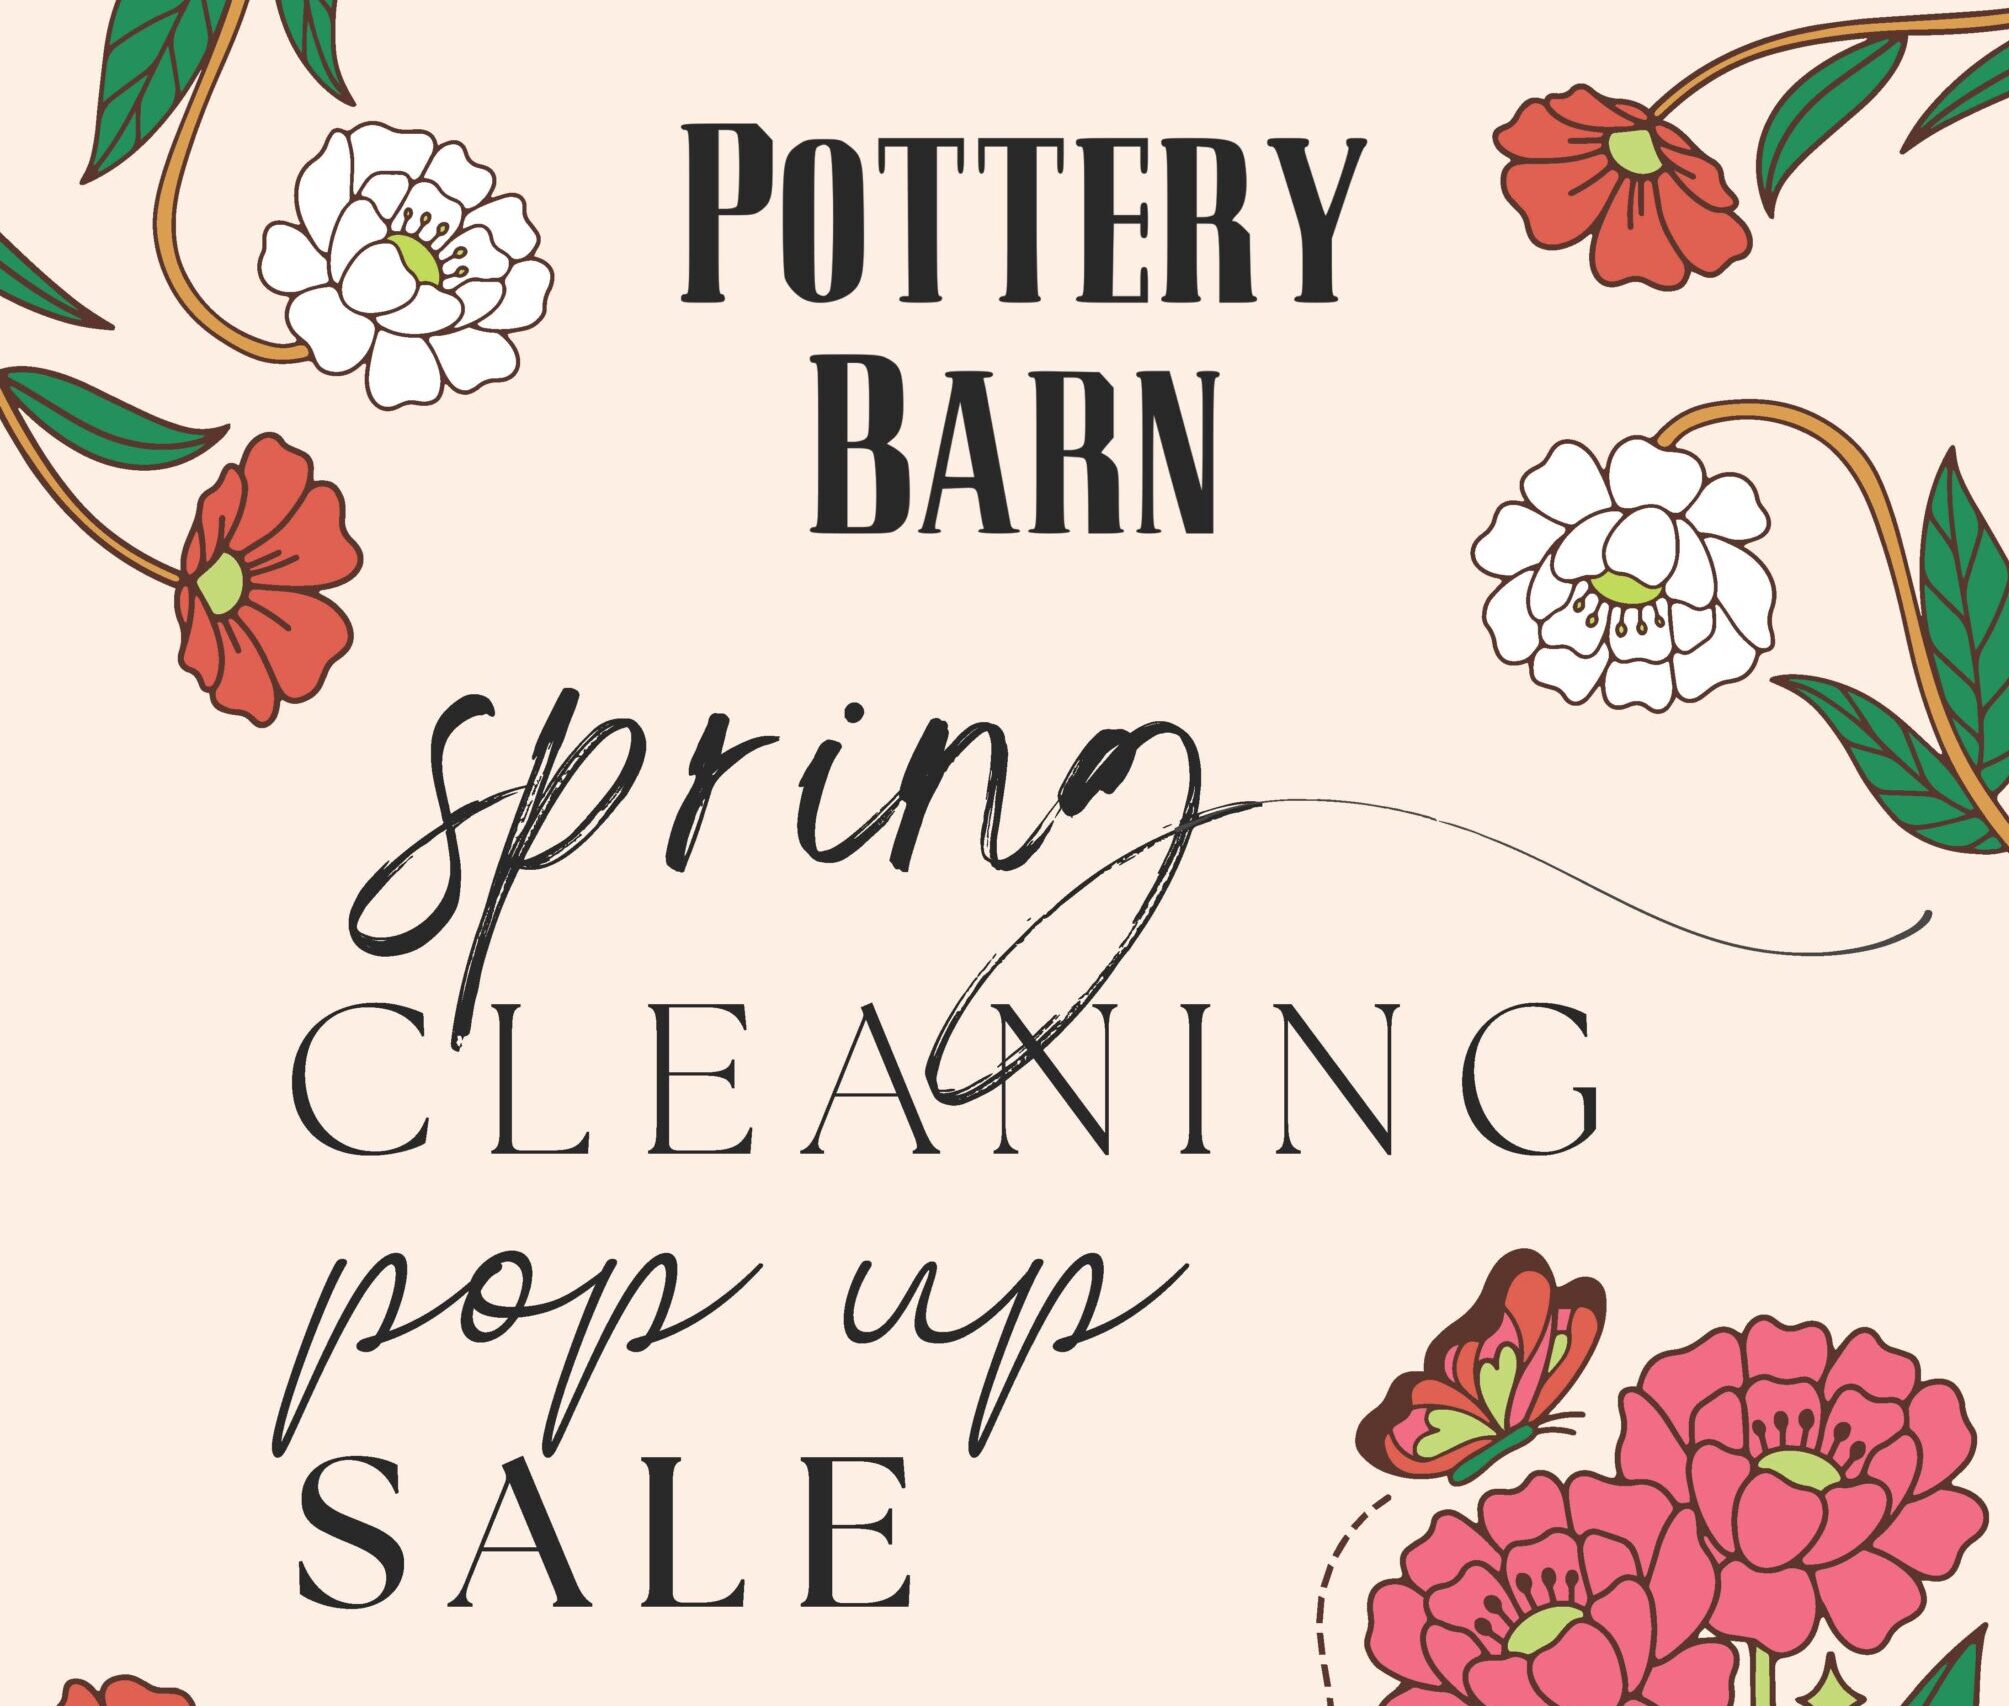 Pottery Barn “Spring Cleaning” Pop Up Sale